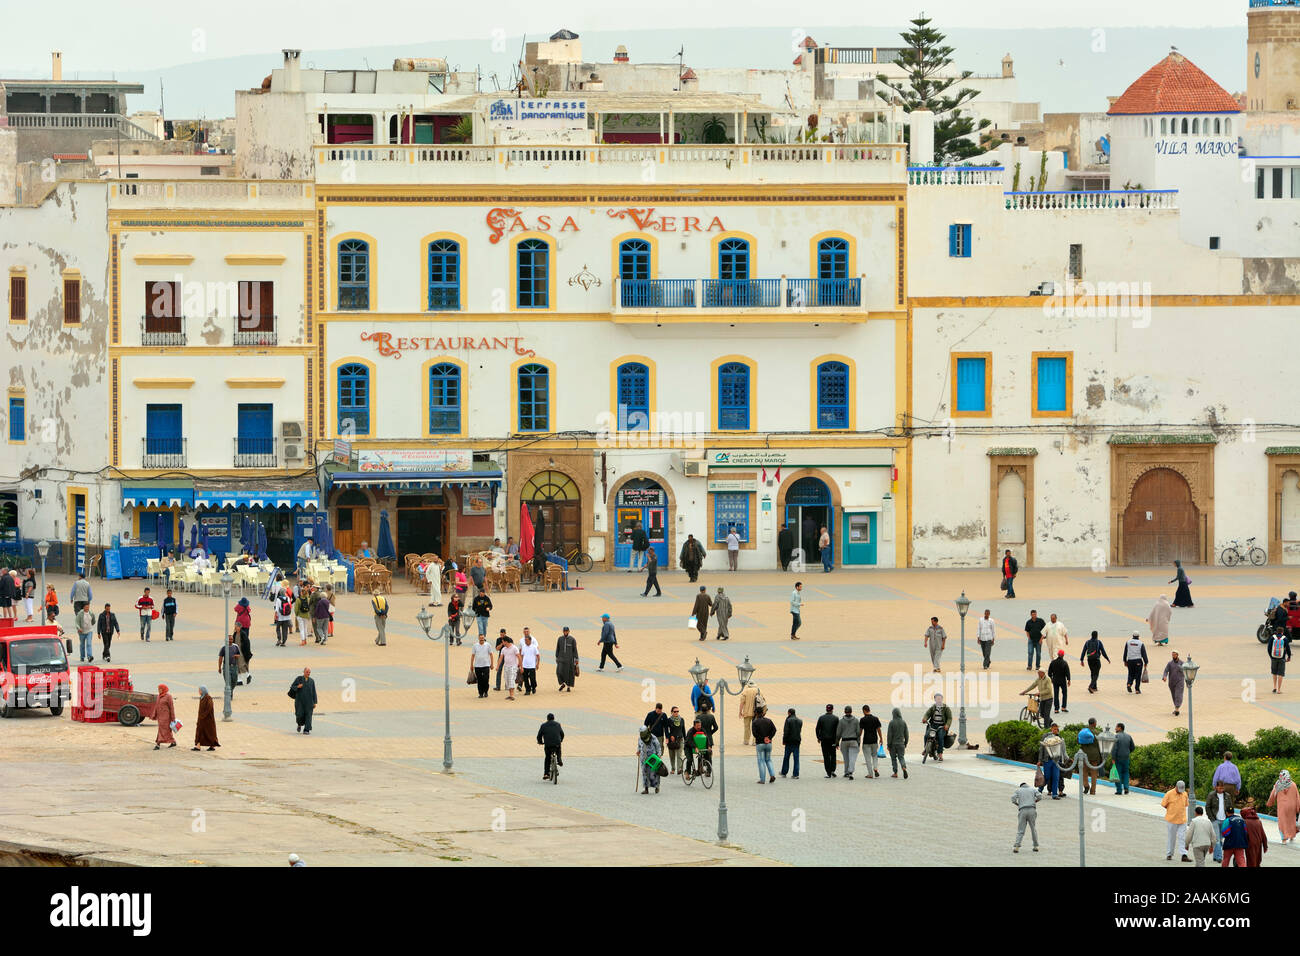 Place Moulay Hassan, Essaouira. A Unesco World Heritage Site, Morocco Stock Photo